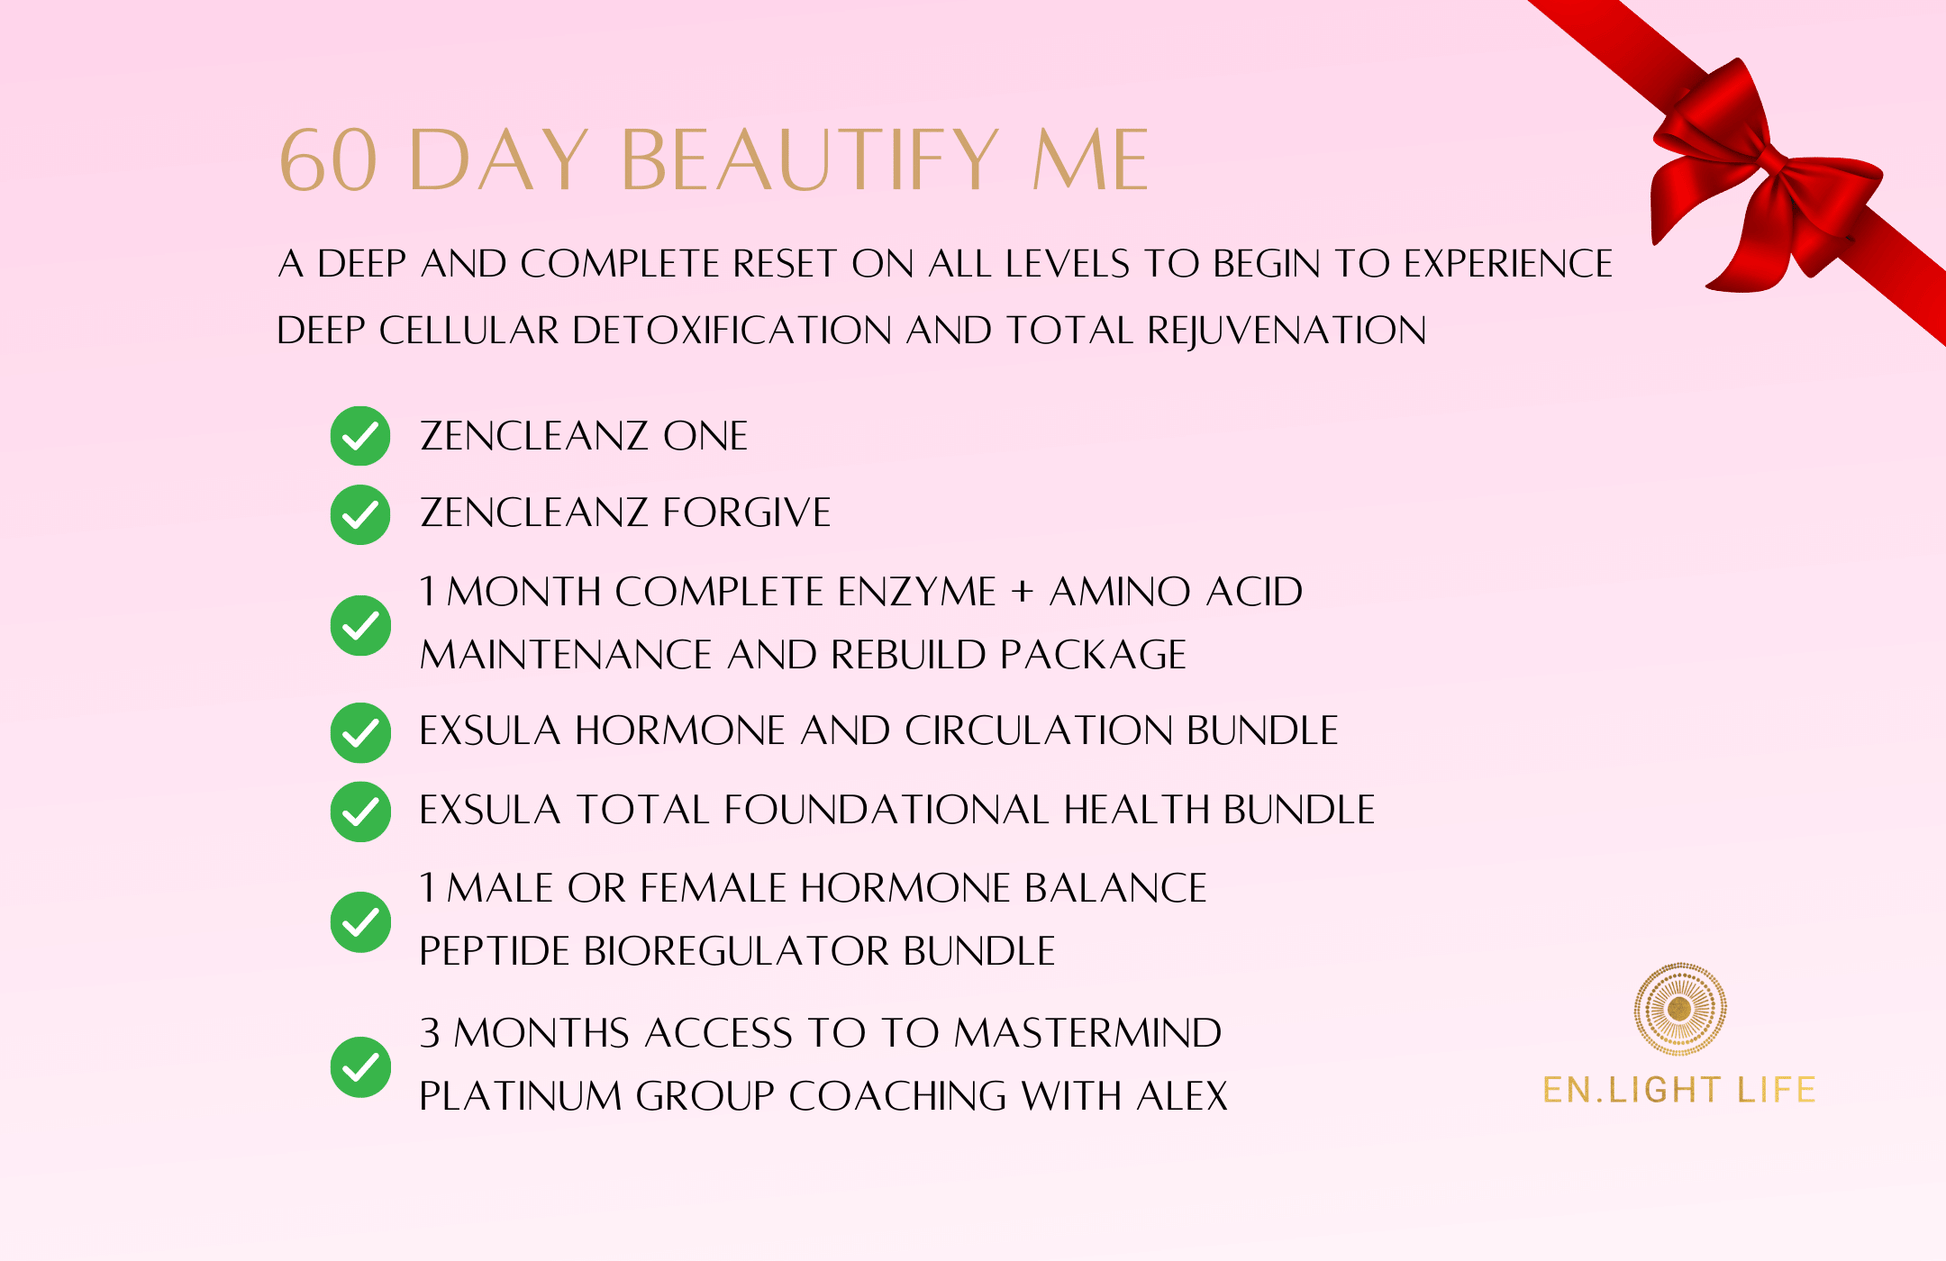 60 DAY BEAUTIFY ME